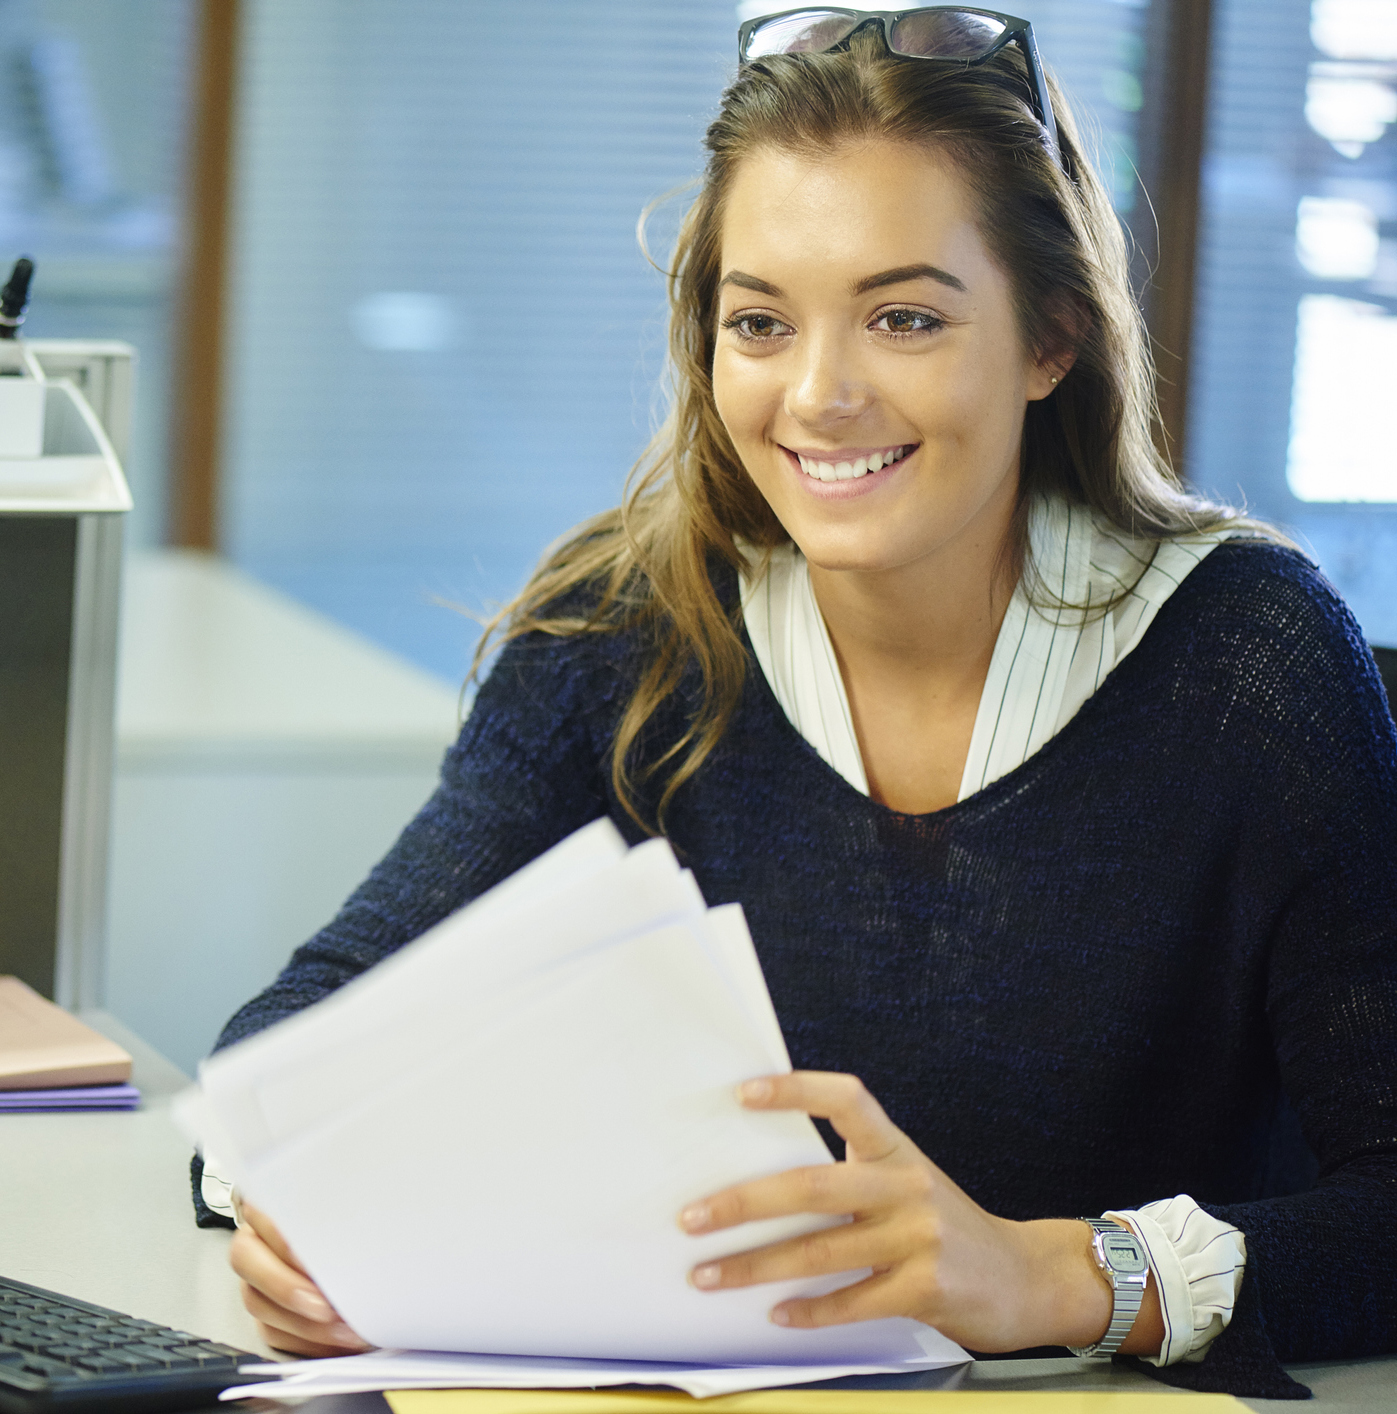 A student smiling while seated handling paperwork